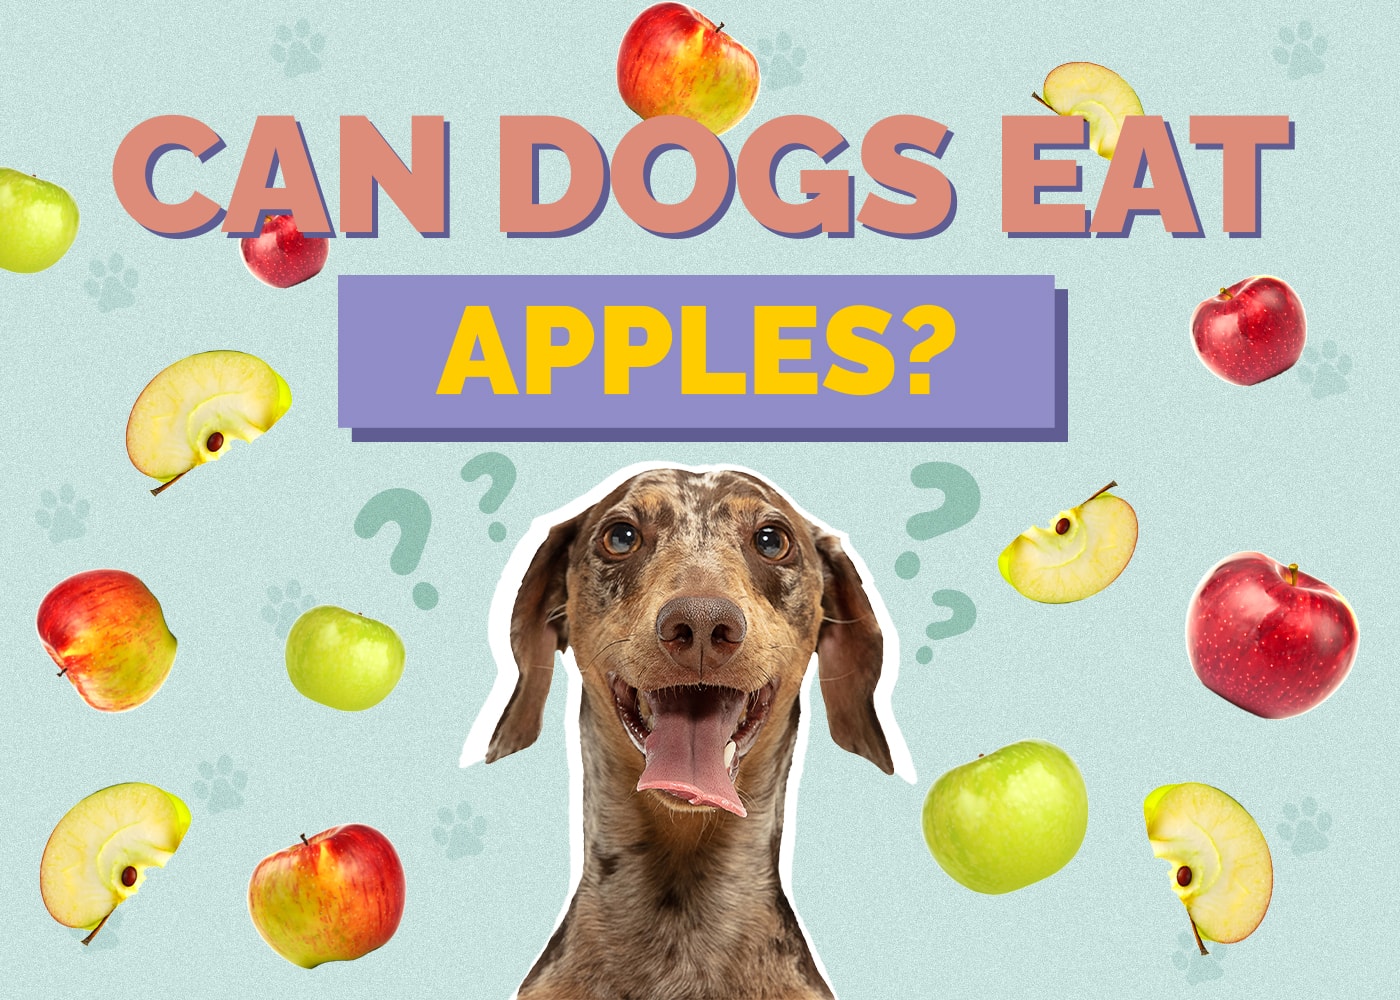 Can Dog Eat apples